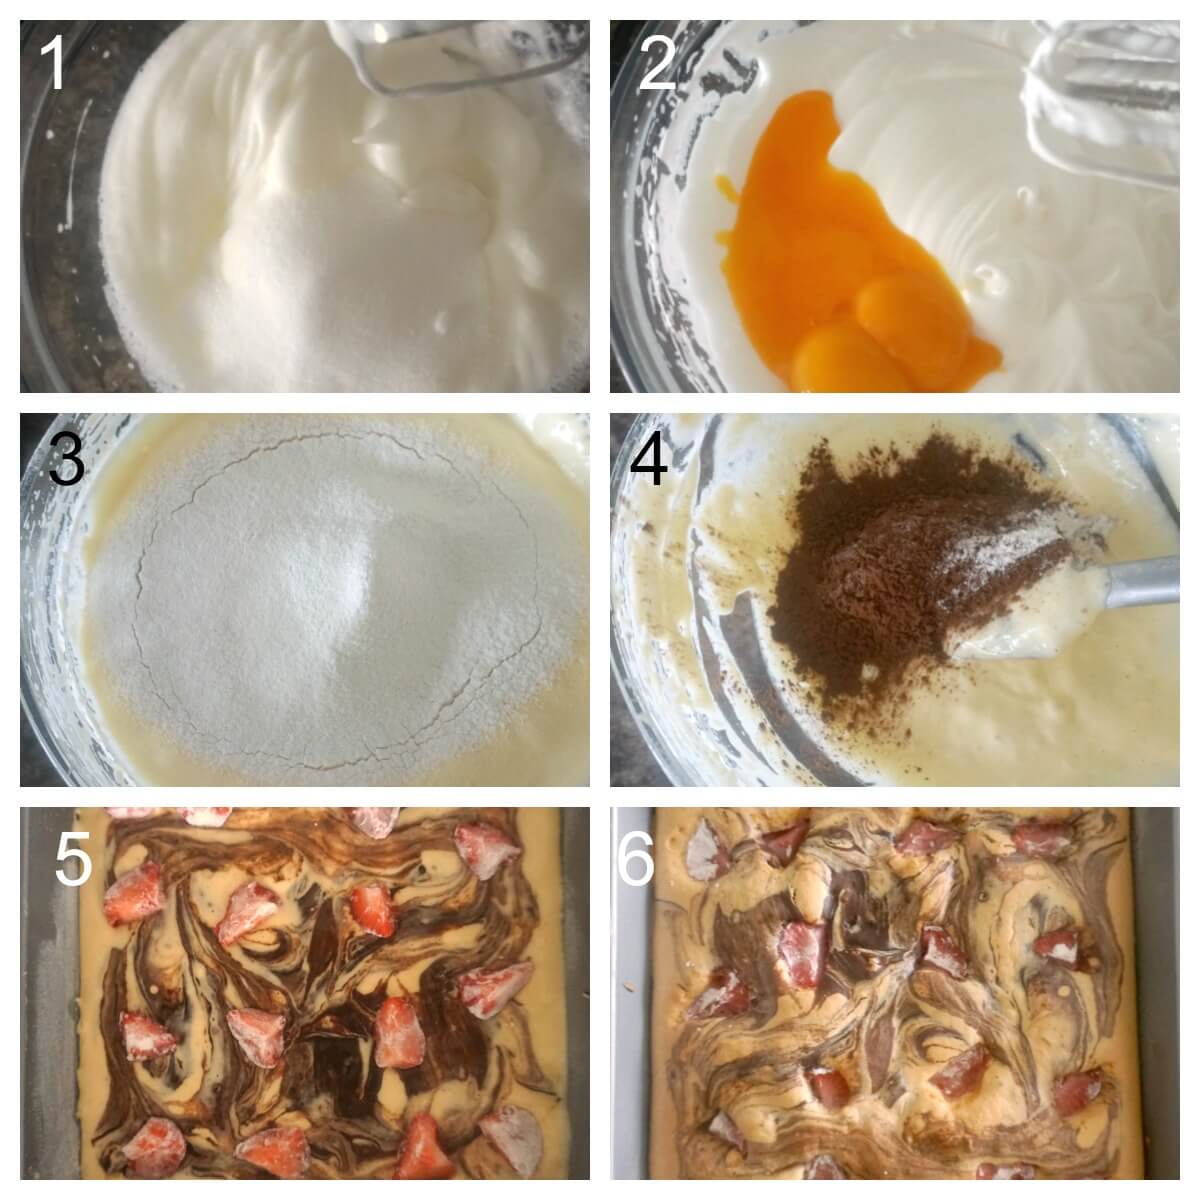 Collage of 6 photos to show how to make strawberry chocolate sponge cakes.